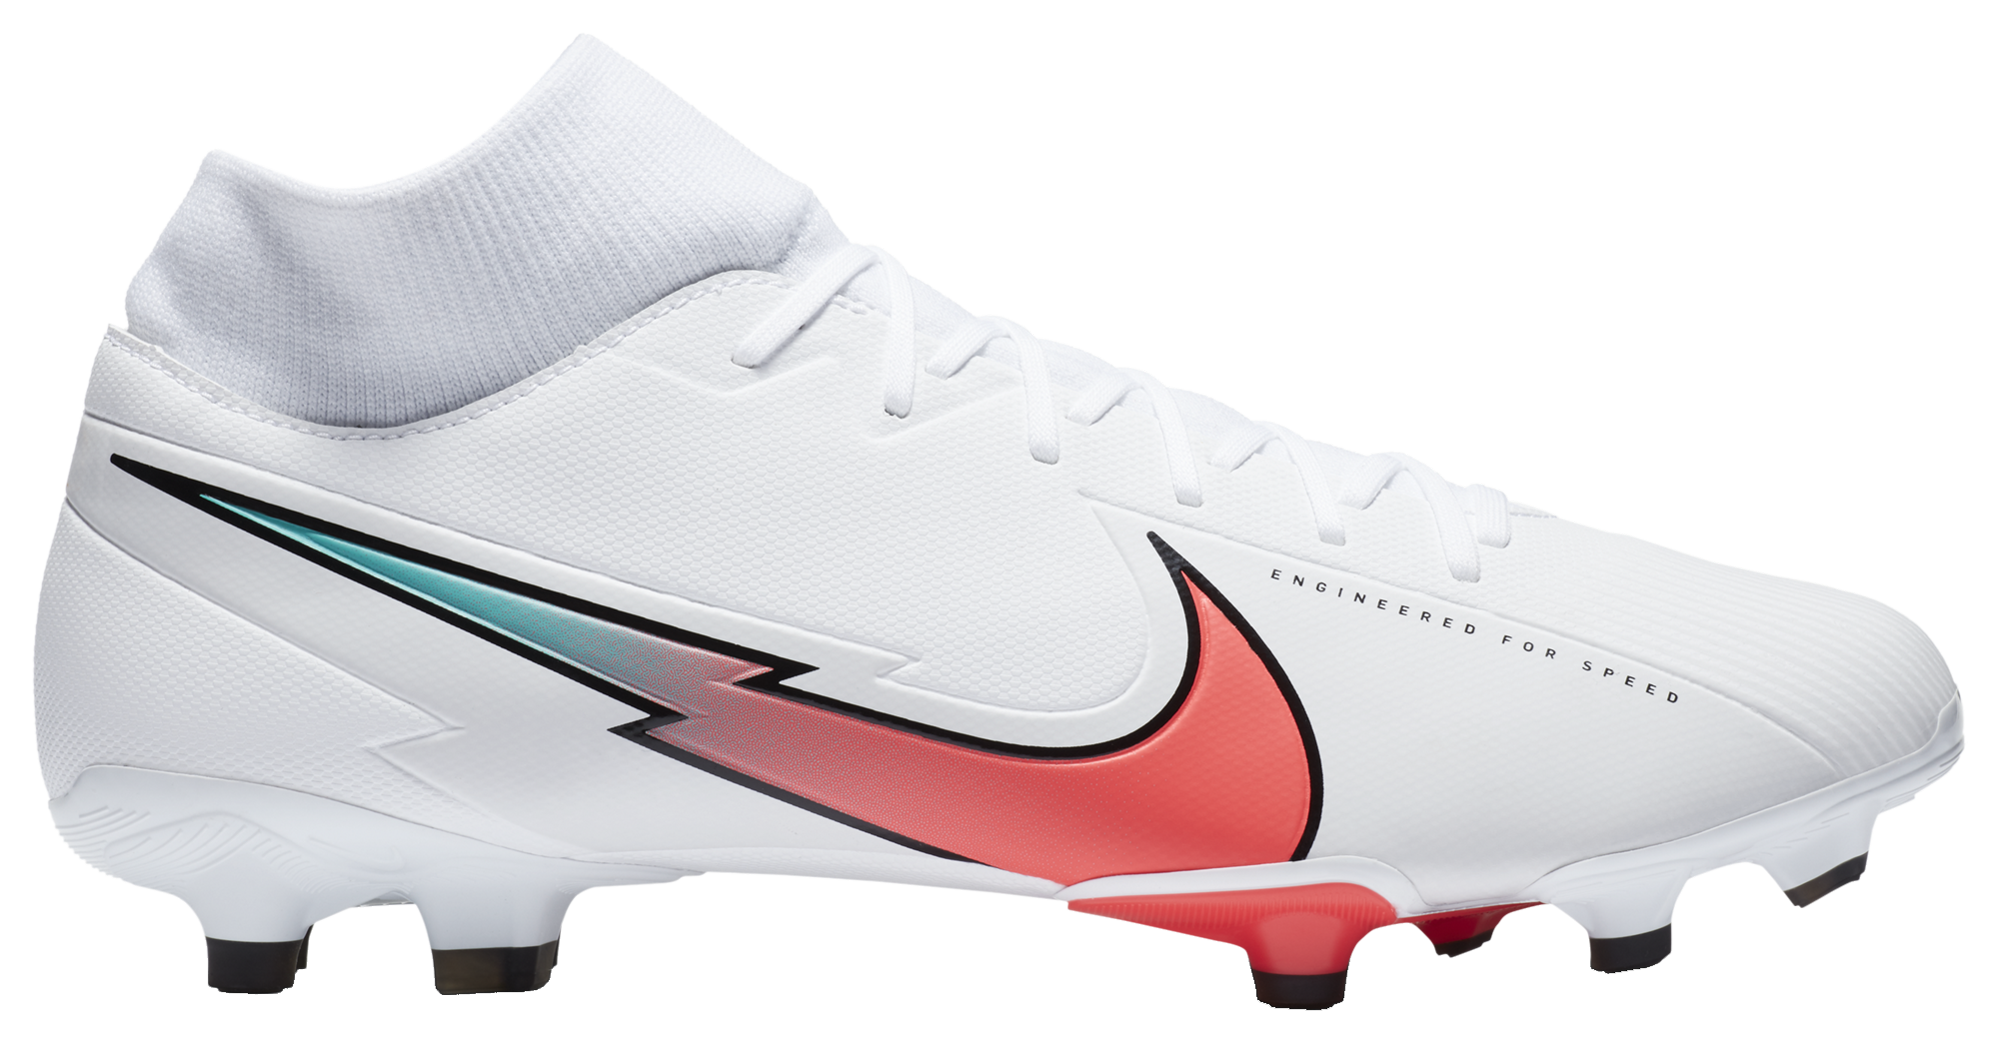 nike superfly soccer cleats